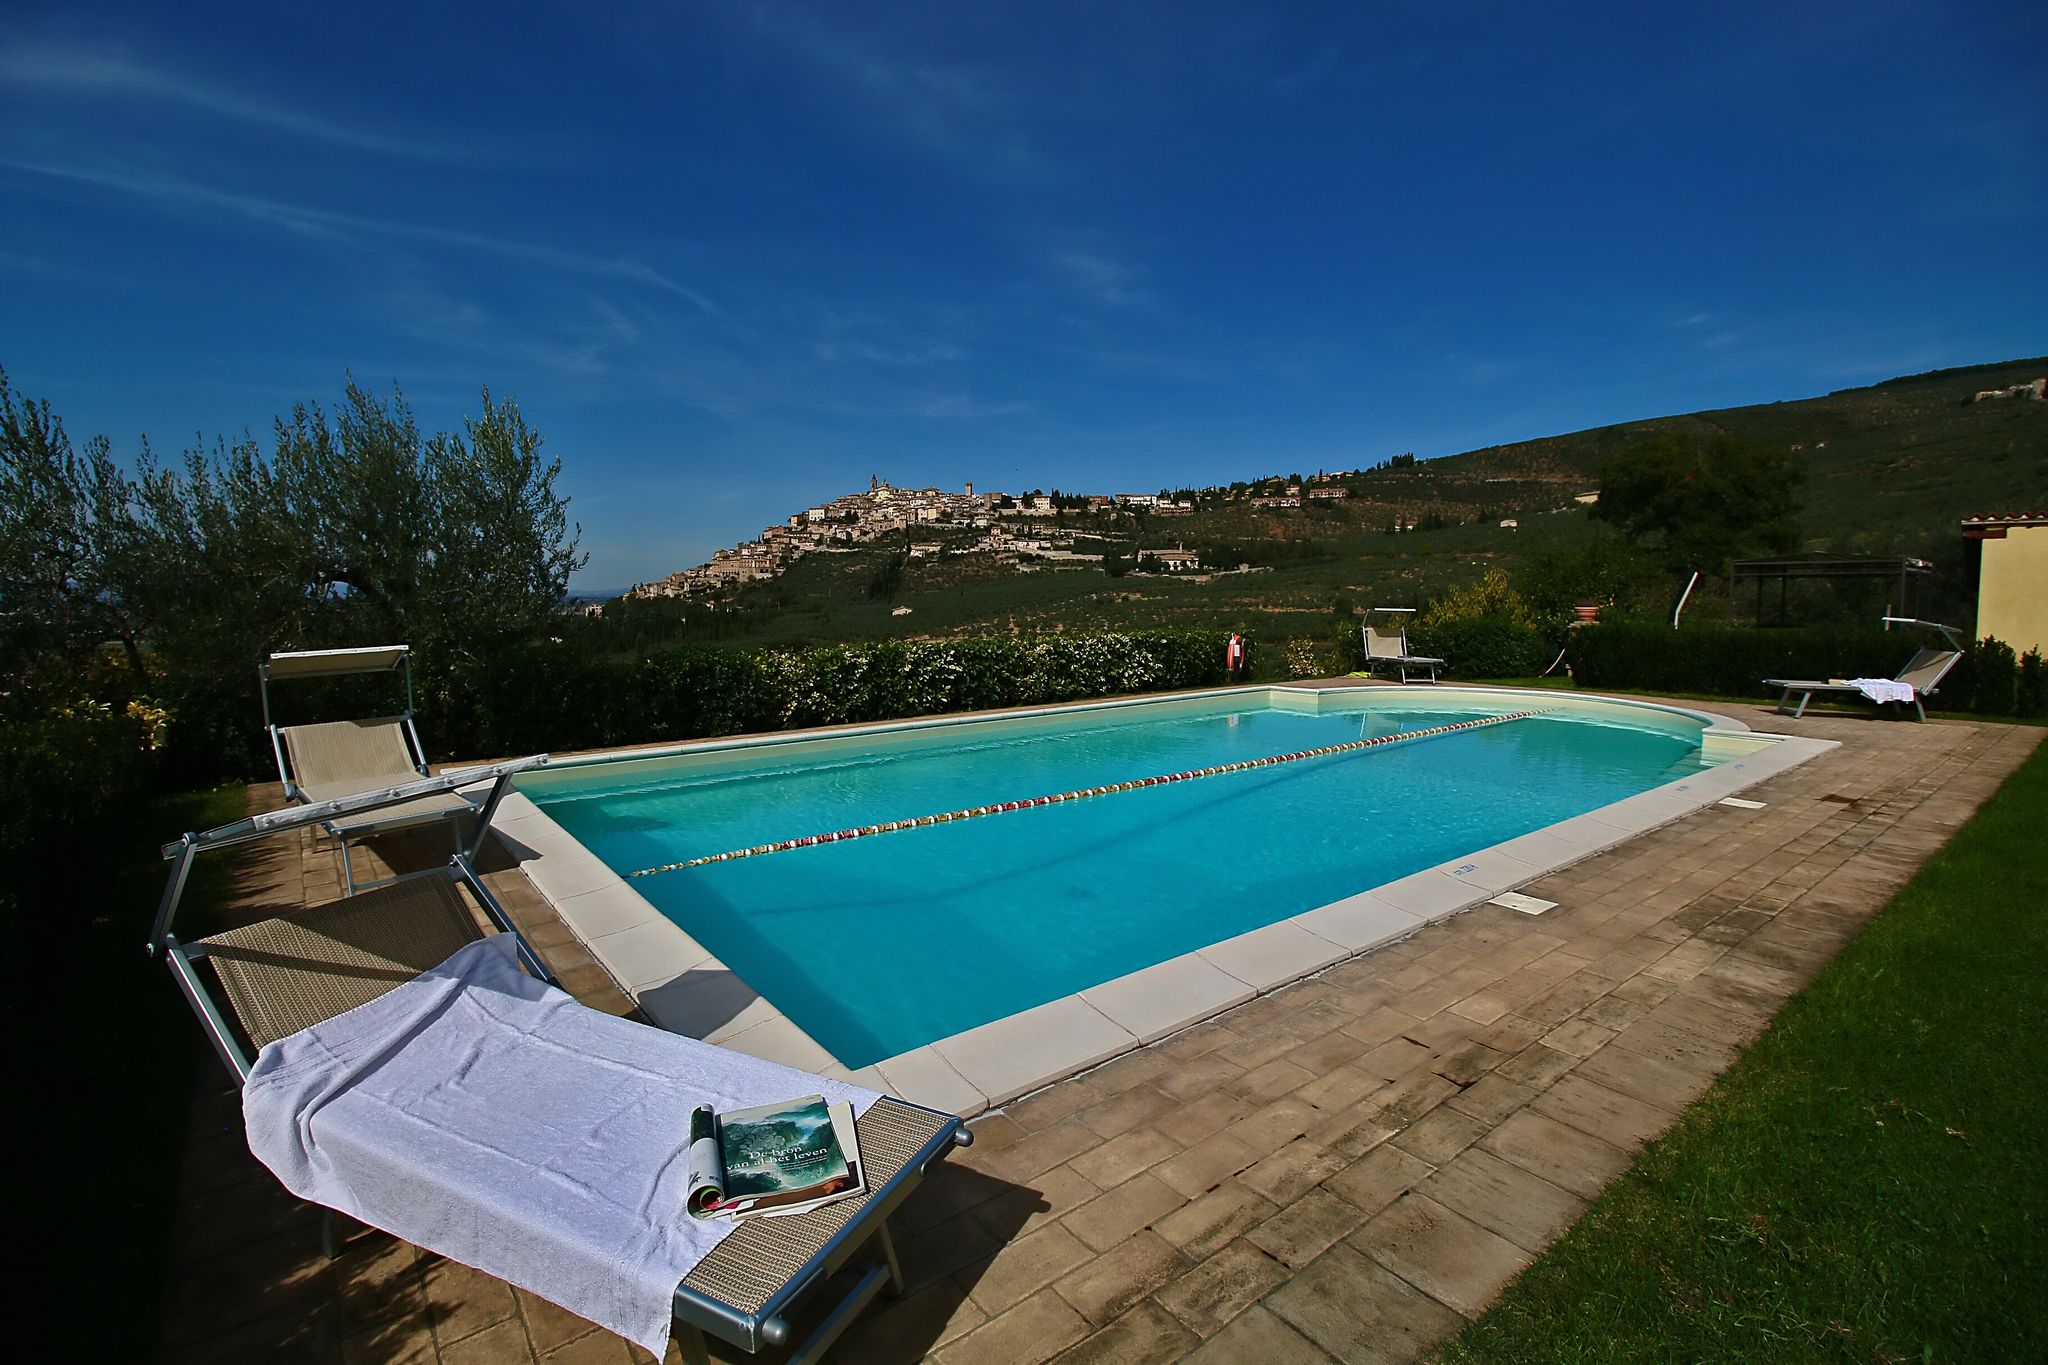 Quaint Farmhouse in Trevi with Swimming Pool